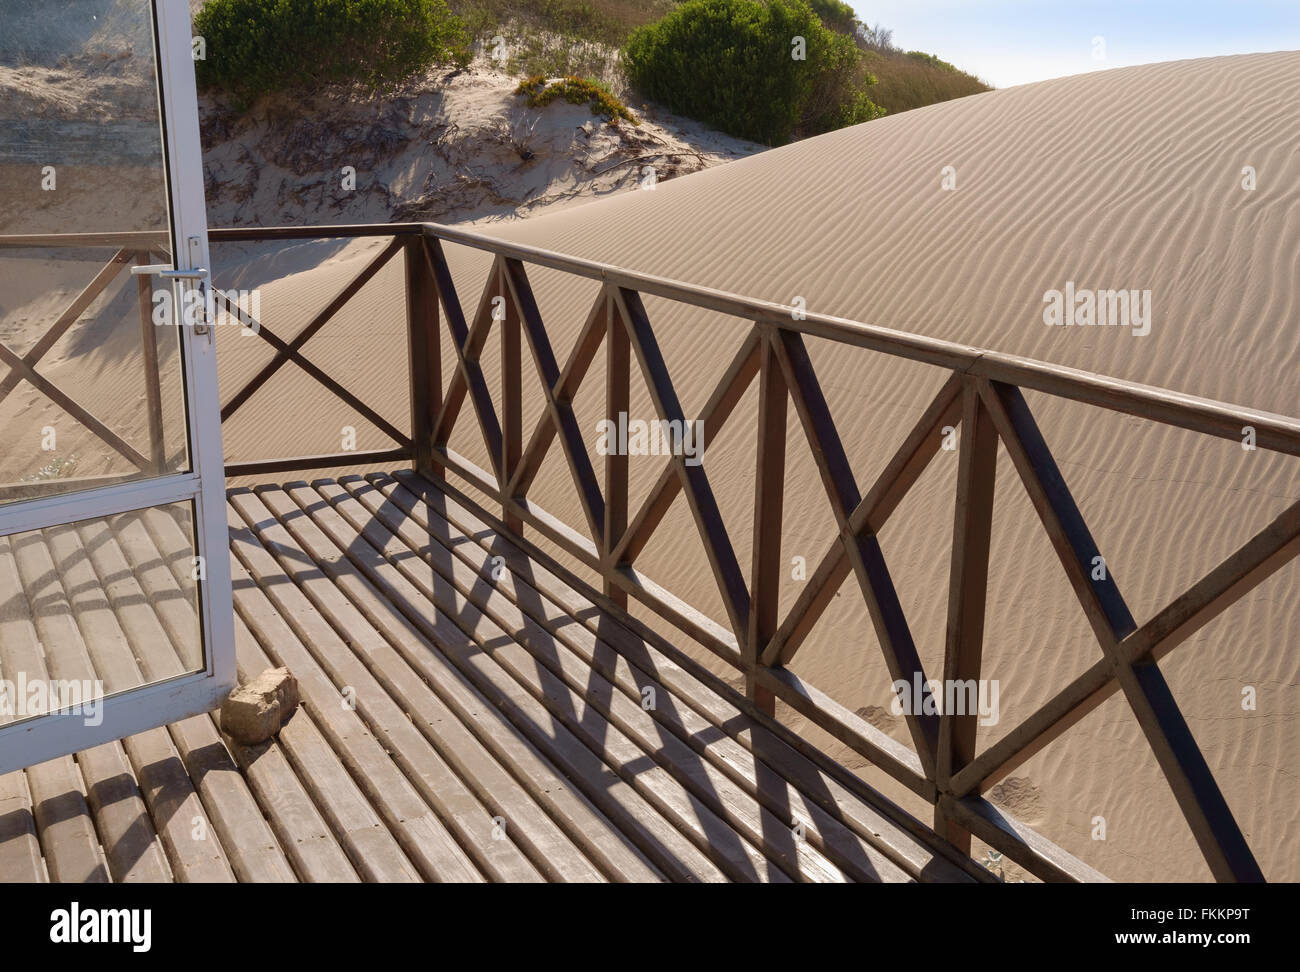 Sand dune encroaching on house in Witsand, Western Cape, South Africa Stock Photo